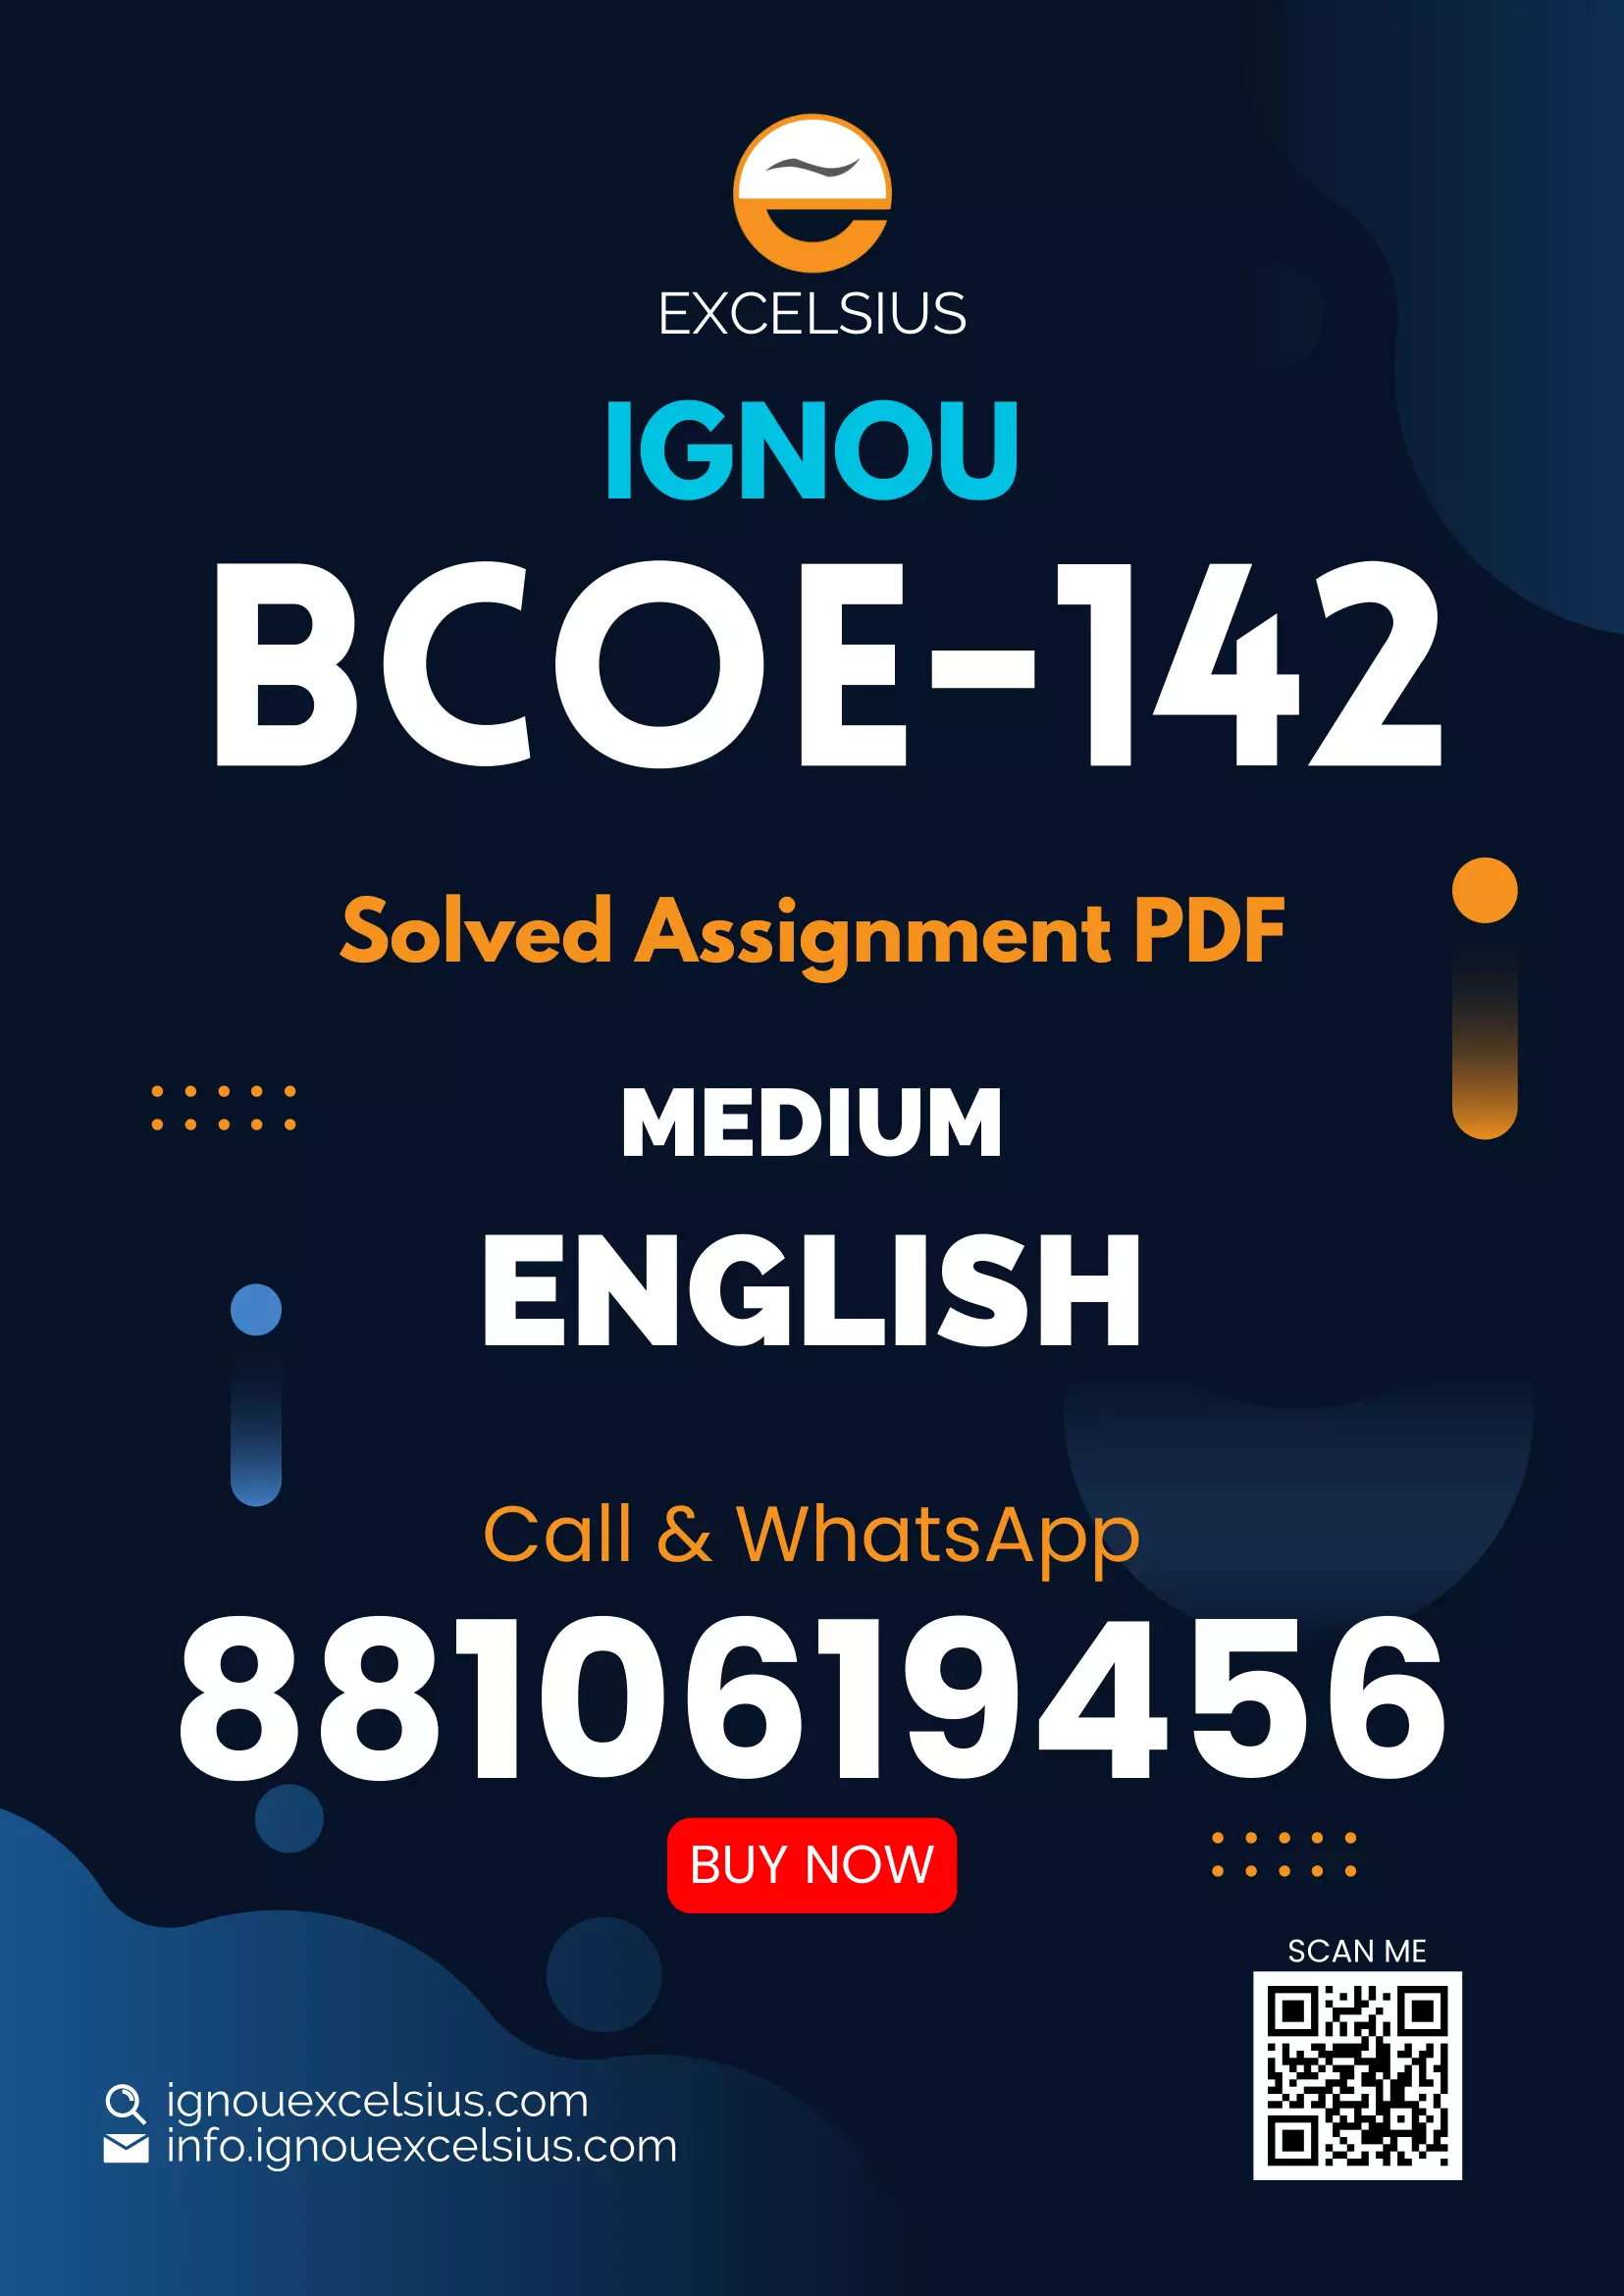 IGNOU BCOE-142 - Fundamentals of Financial Management, Latest Solved Assignment-January 2023 - December 2023